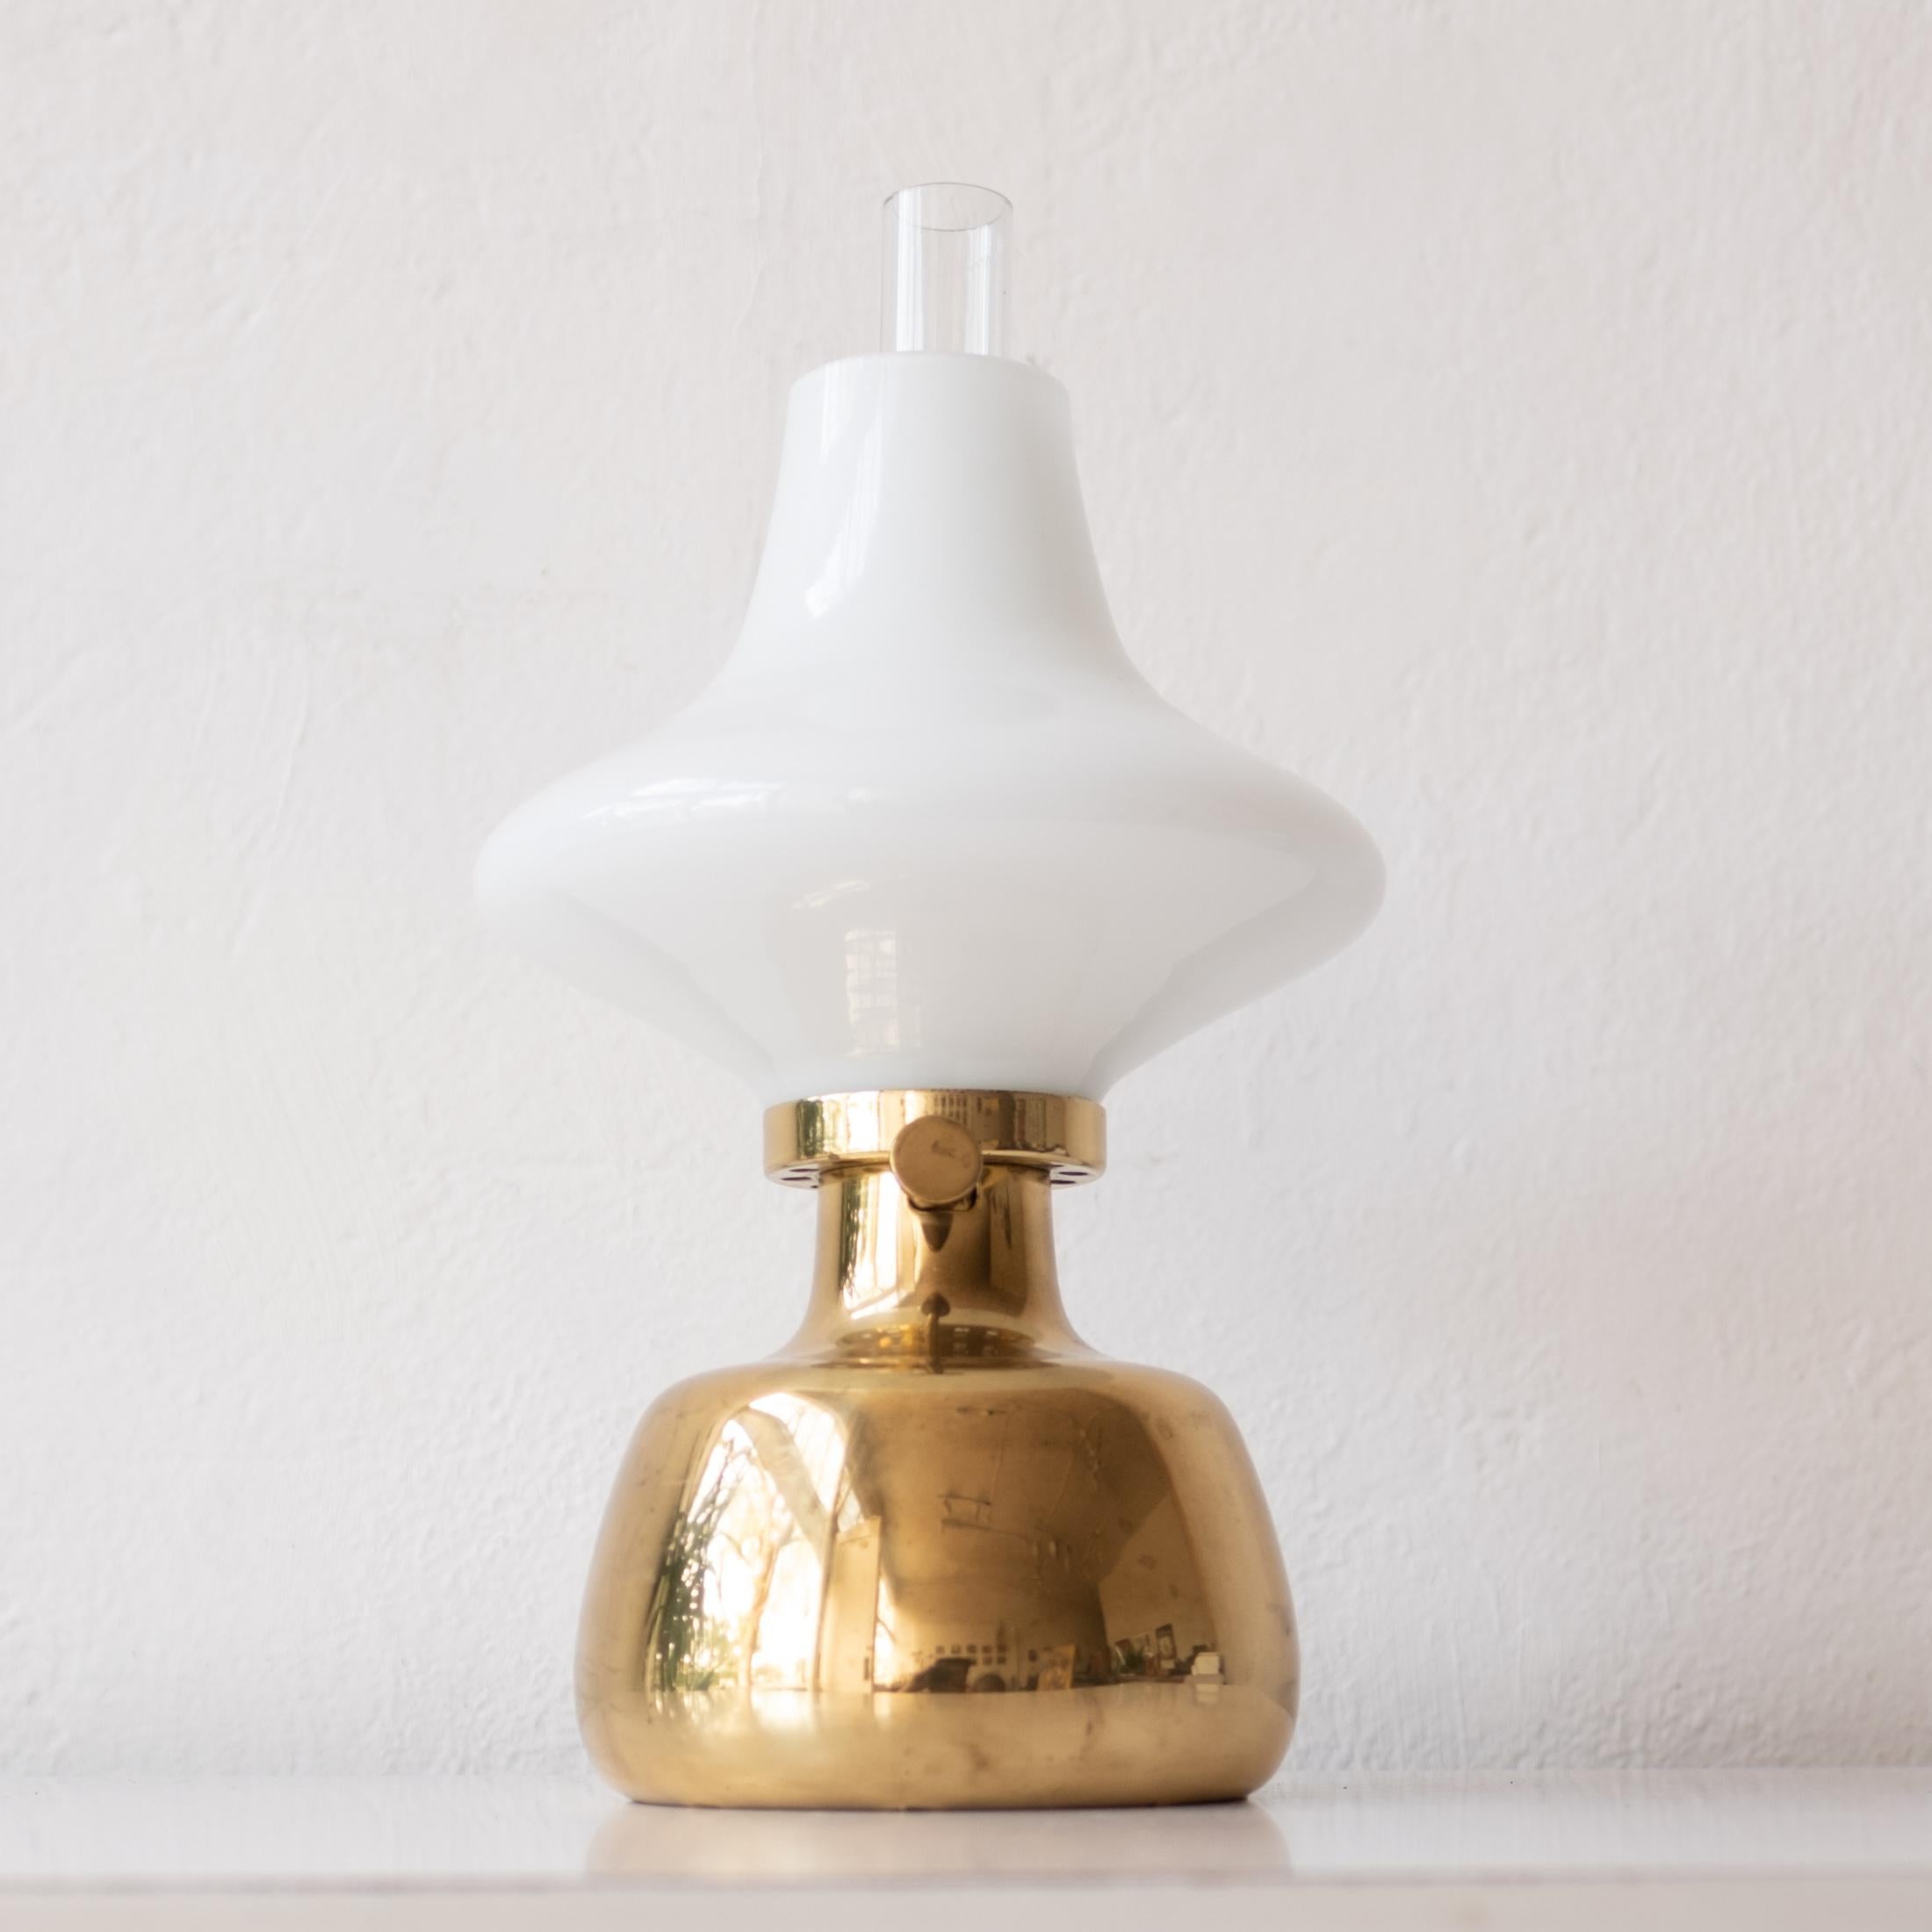 Designed by Henning Koppel and manufactured by Louis Poulsen. The Petronella oil/kerosene table lamp is made from solid brass and has a glass shade.